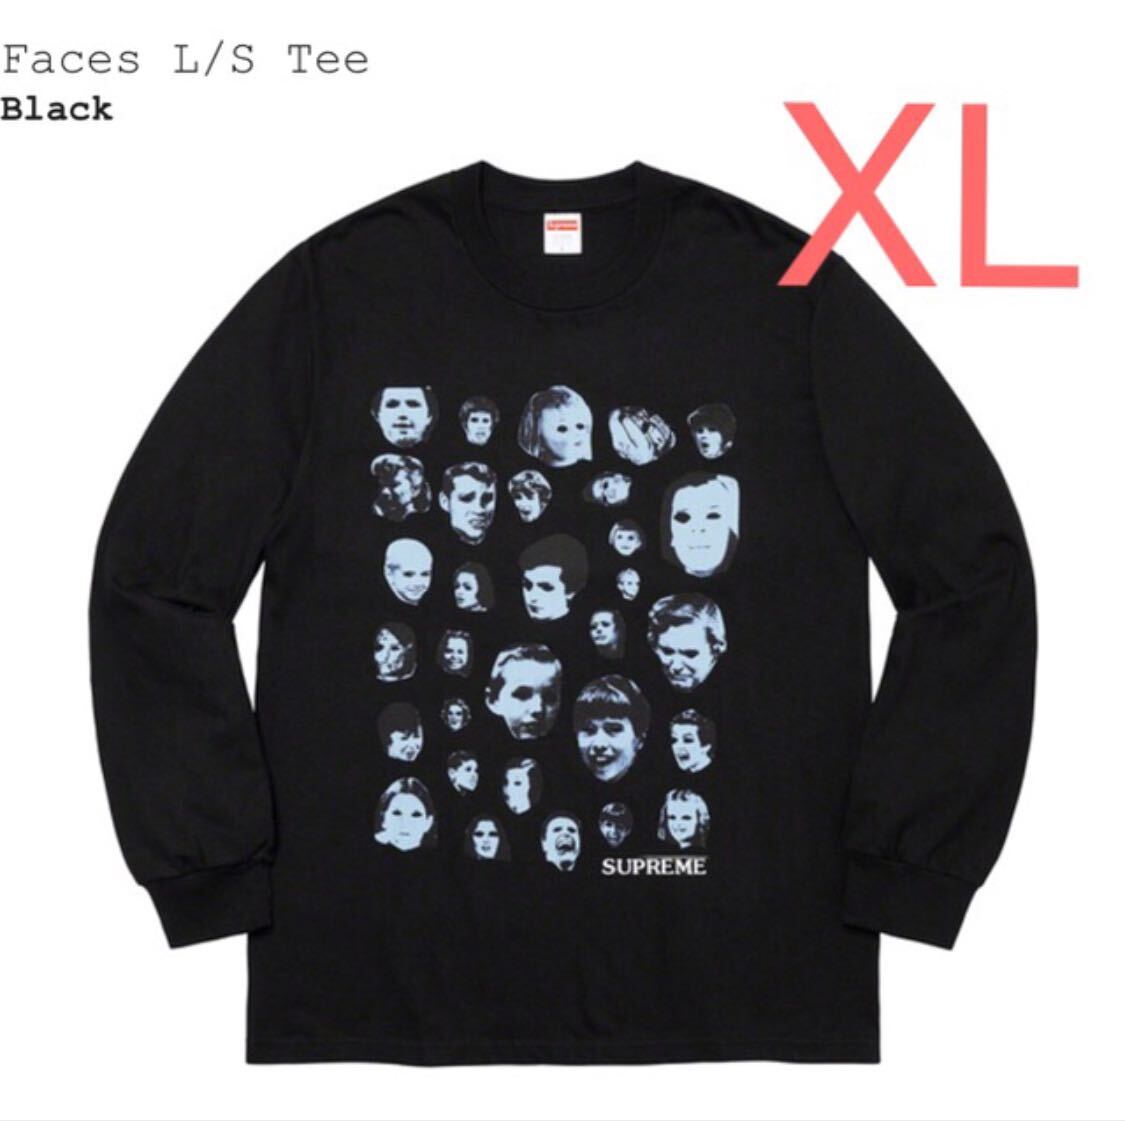 Faces L/S Tee フェイス ロングスリーブ Tee Supreme シュプリーム COLOR/STYLE：Black 黒 SIZE：XL 新品 未使用 